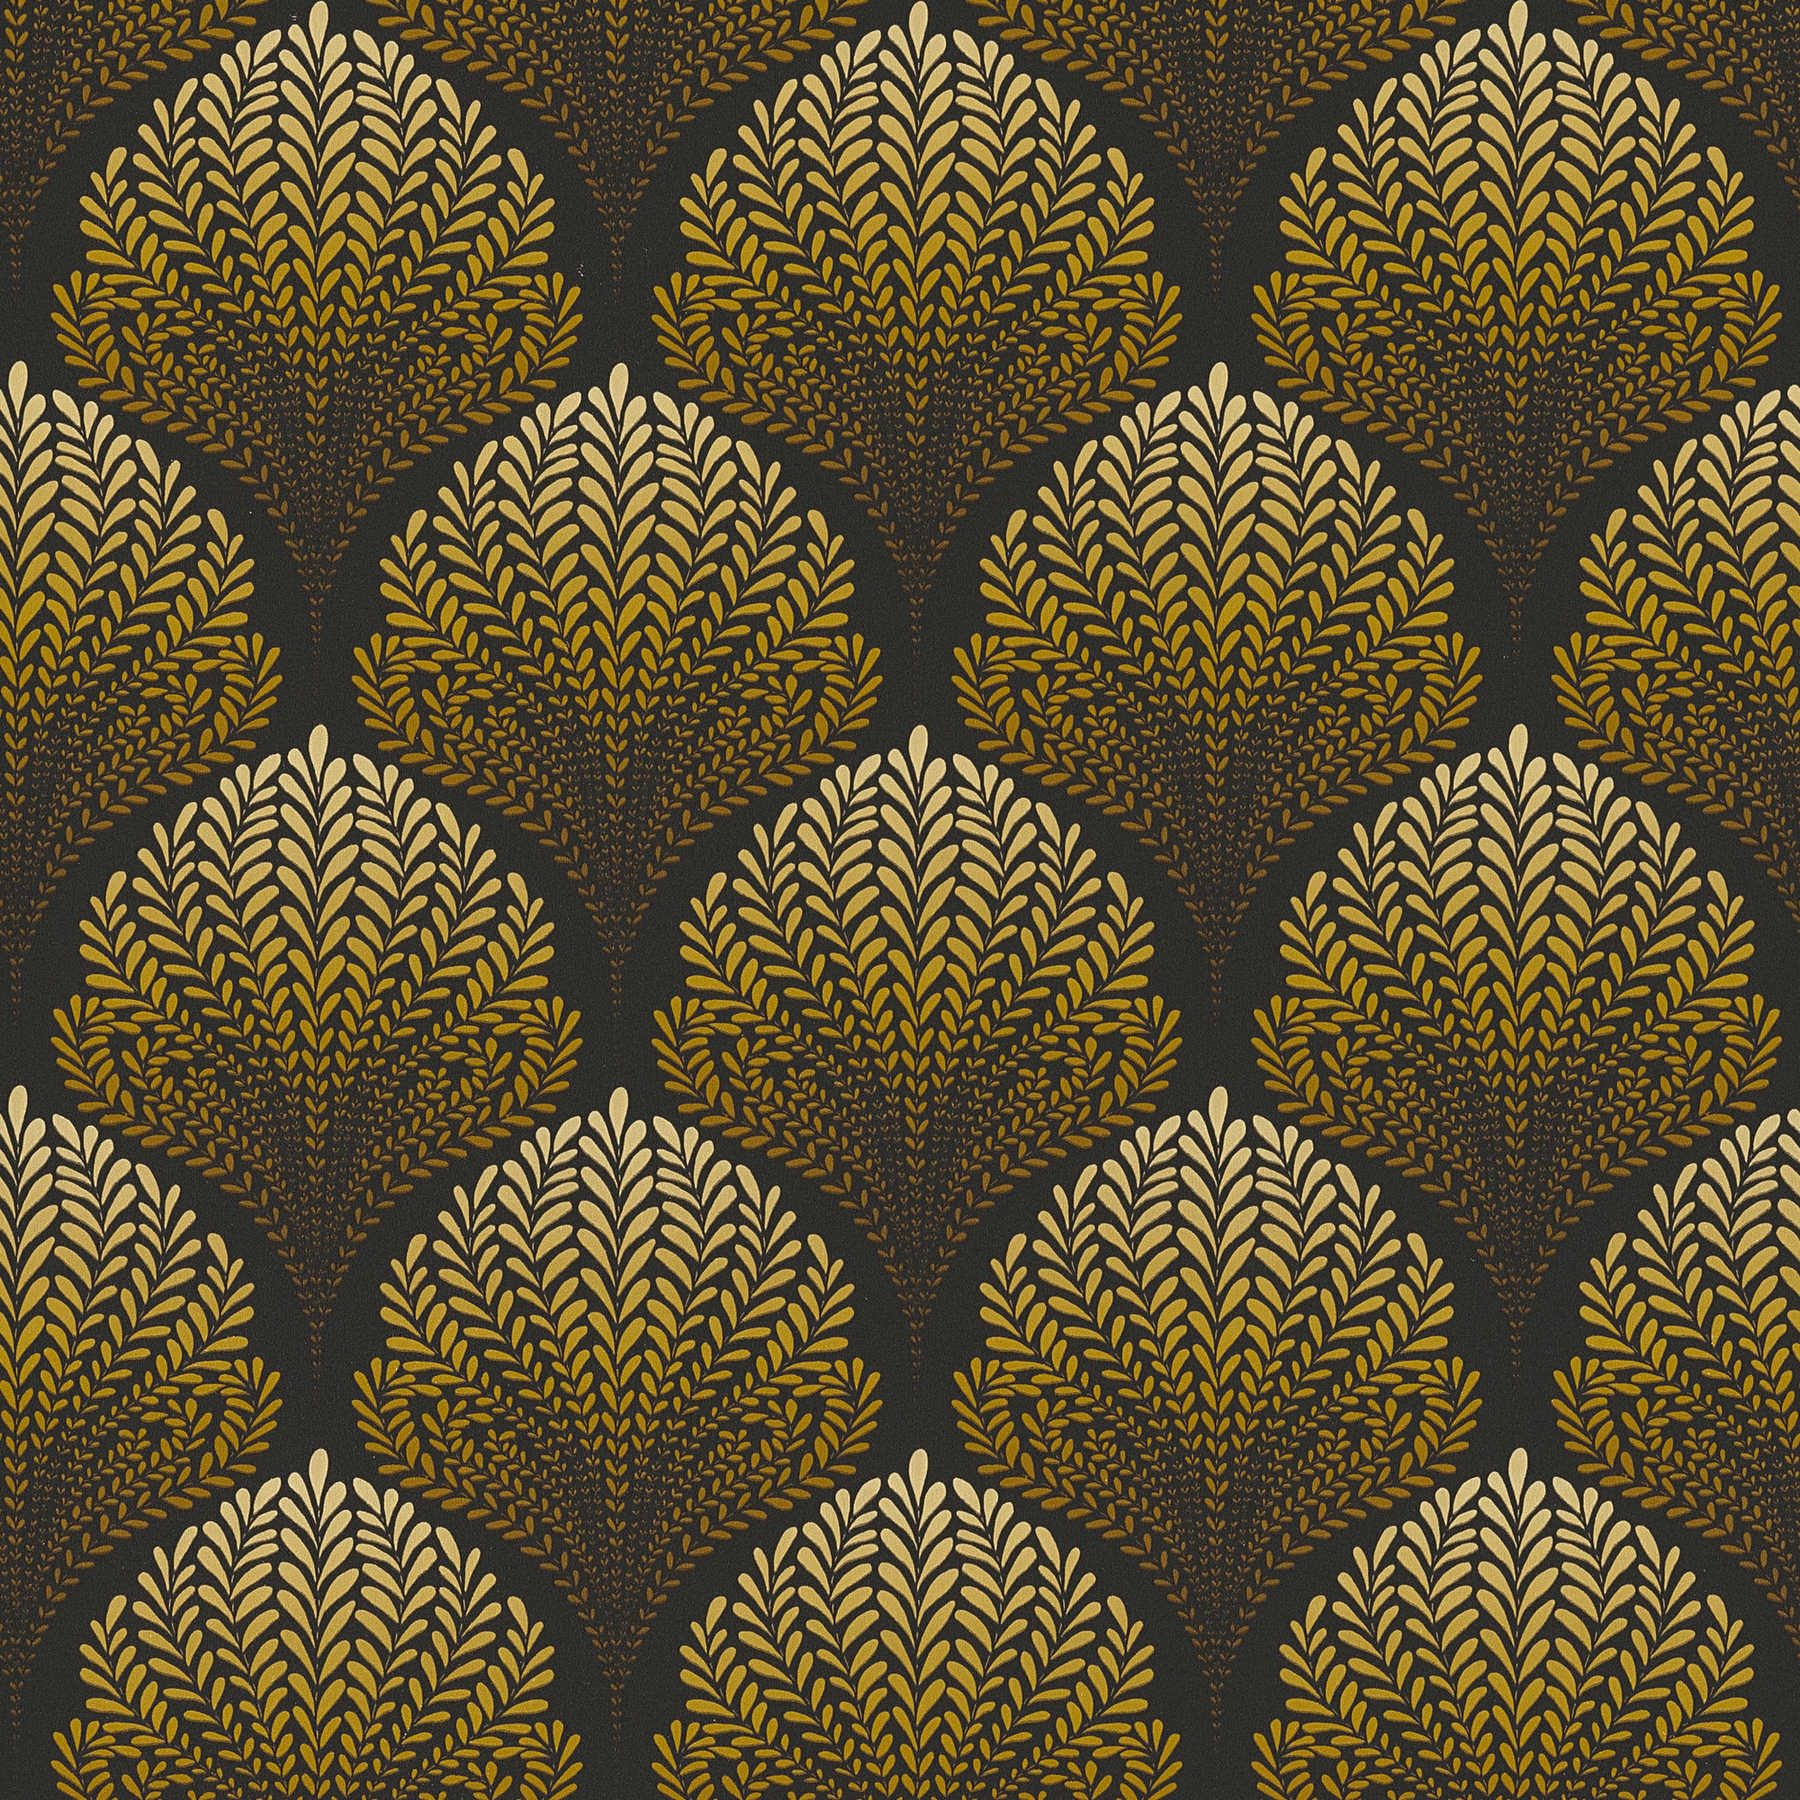         Retro wallpaper with gold ornaments - brown, yellow, black
    